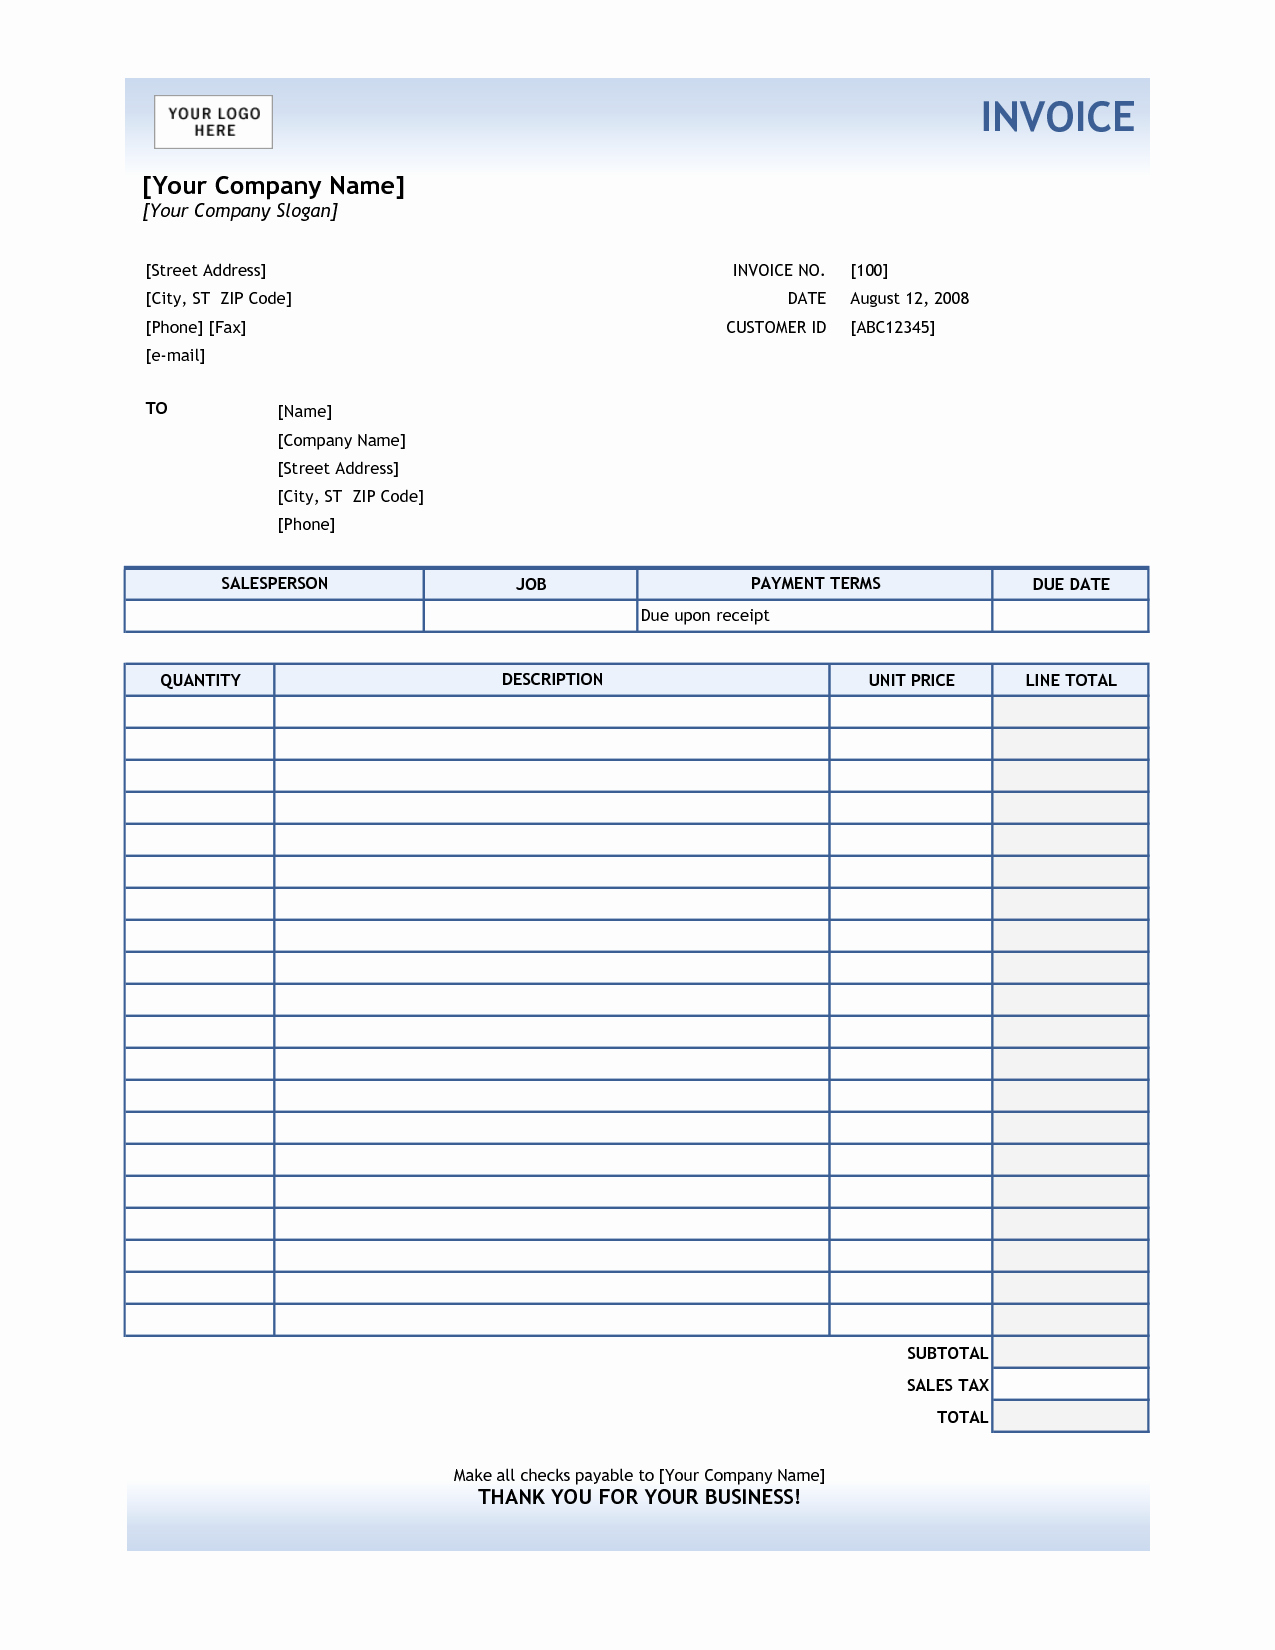 Invoice Template Excel Download Free New Service Invoice Template Excel